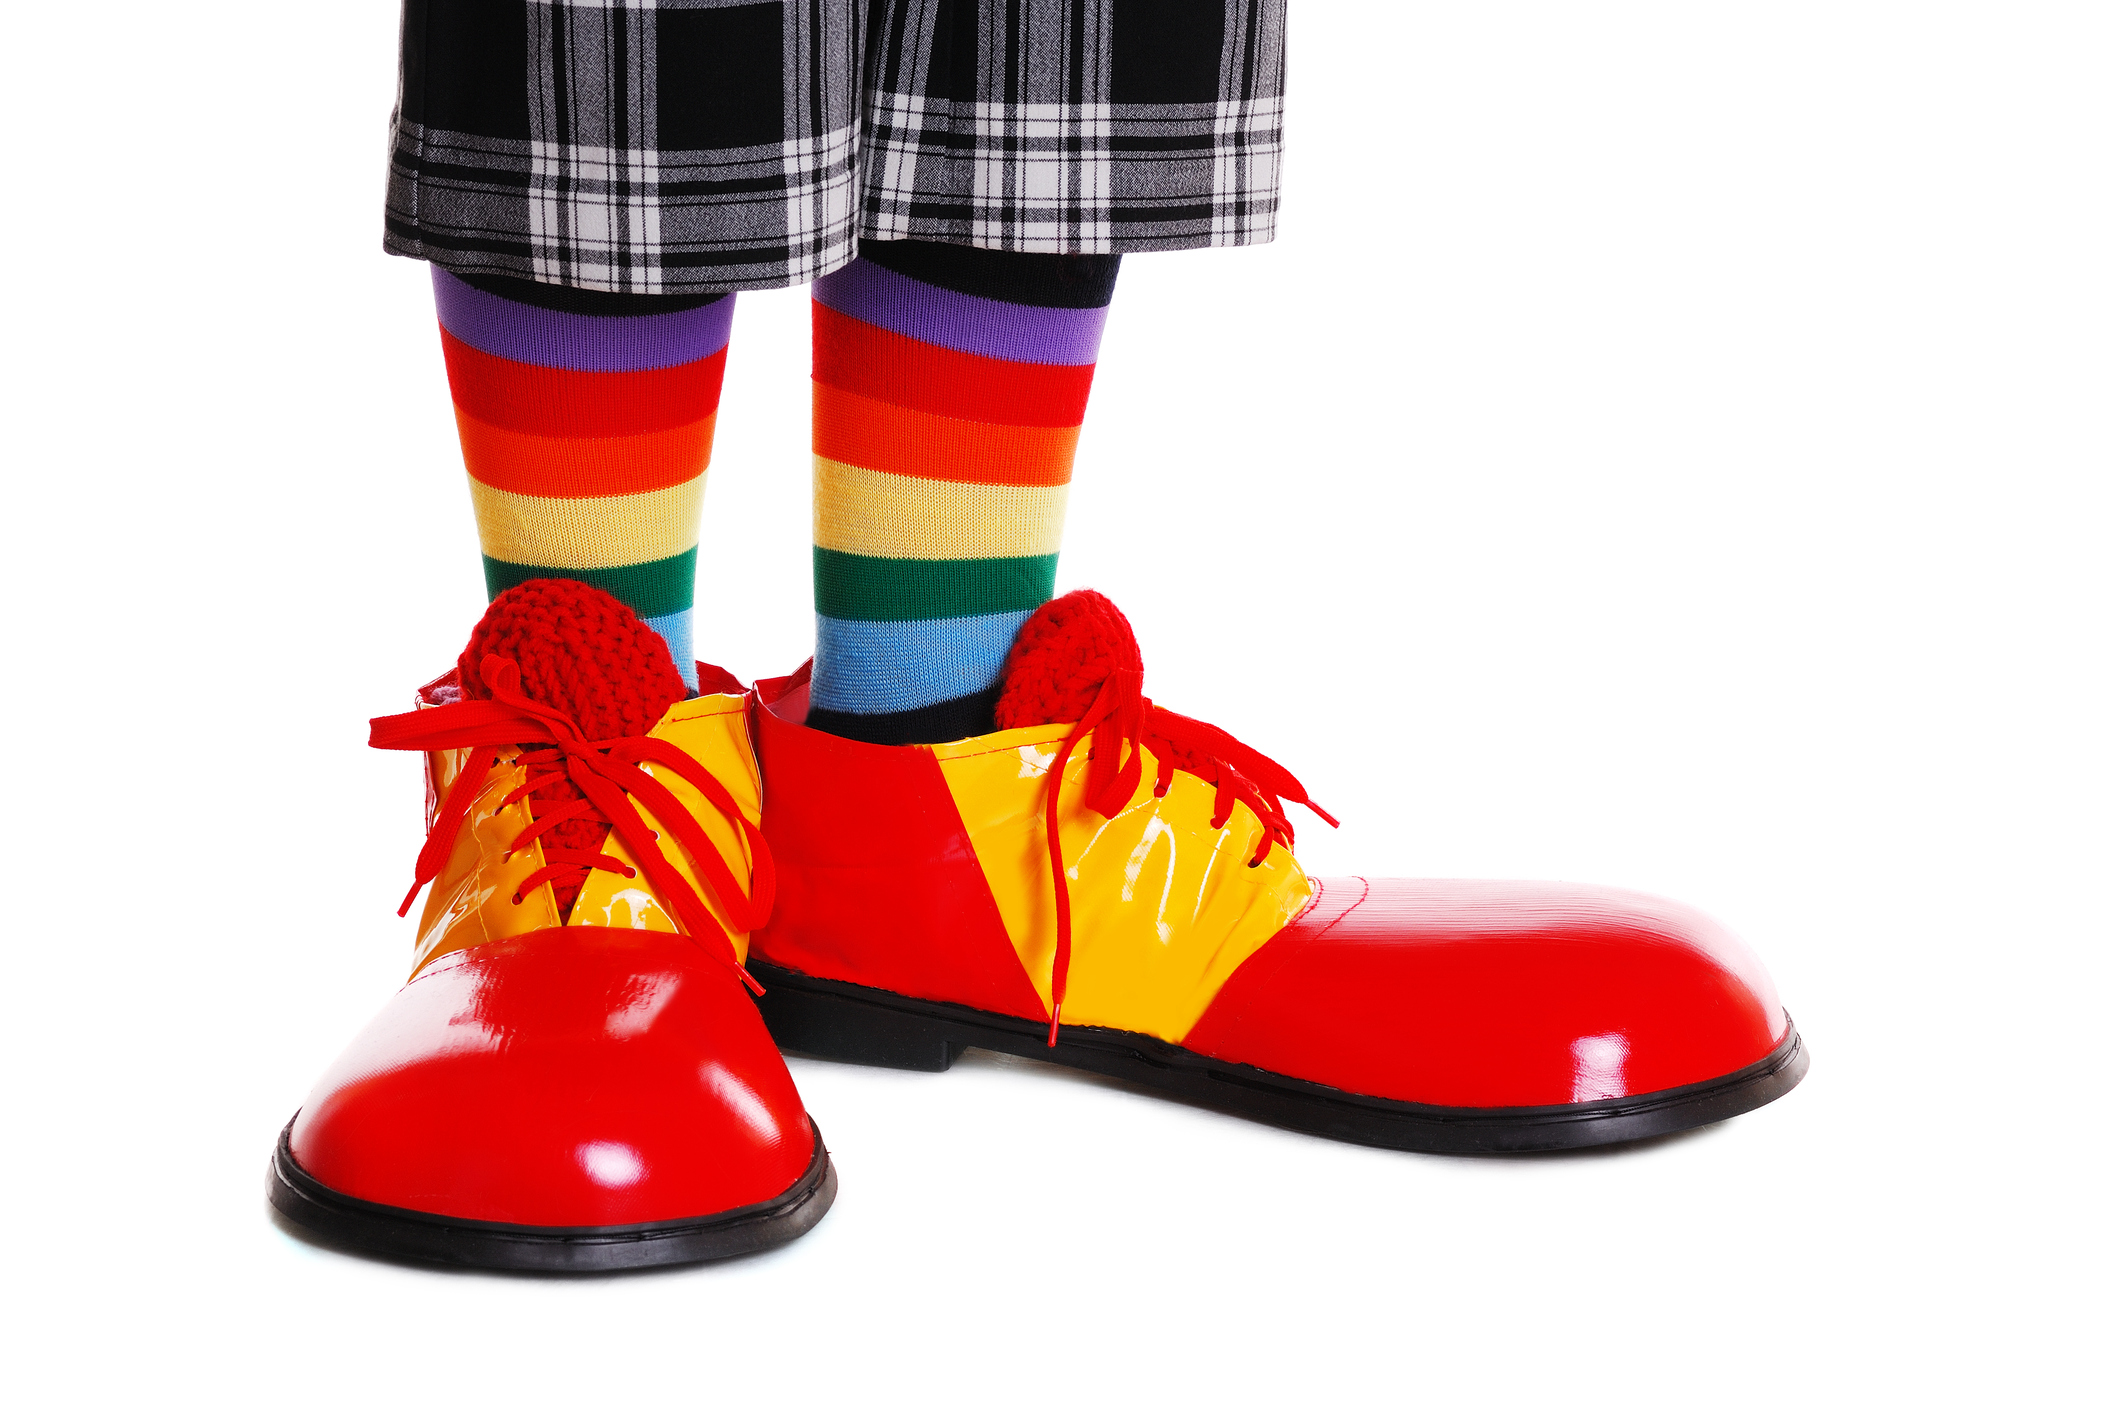 Add a Little Fun to Your Fetish Play with Red Clown Shoes